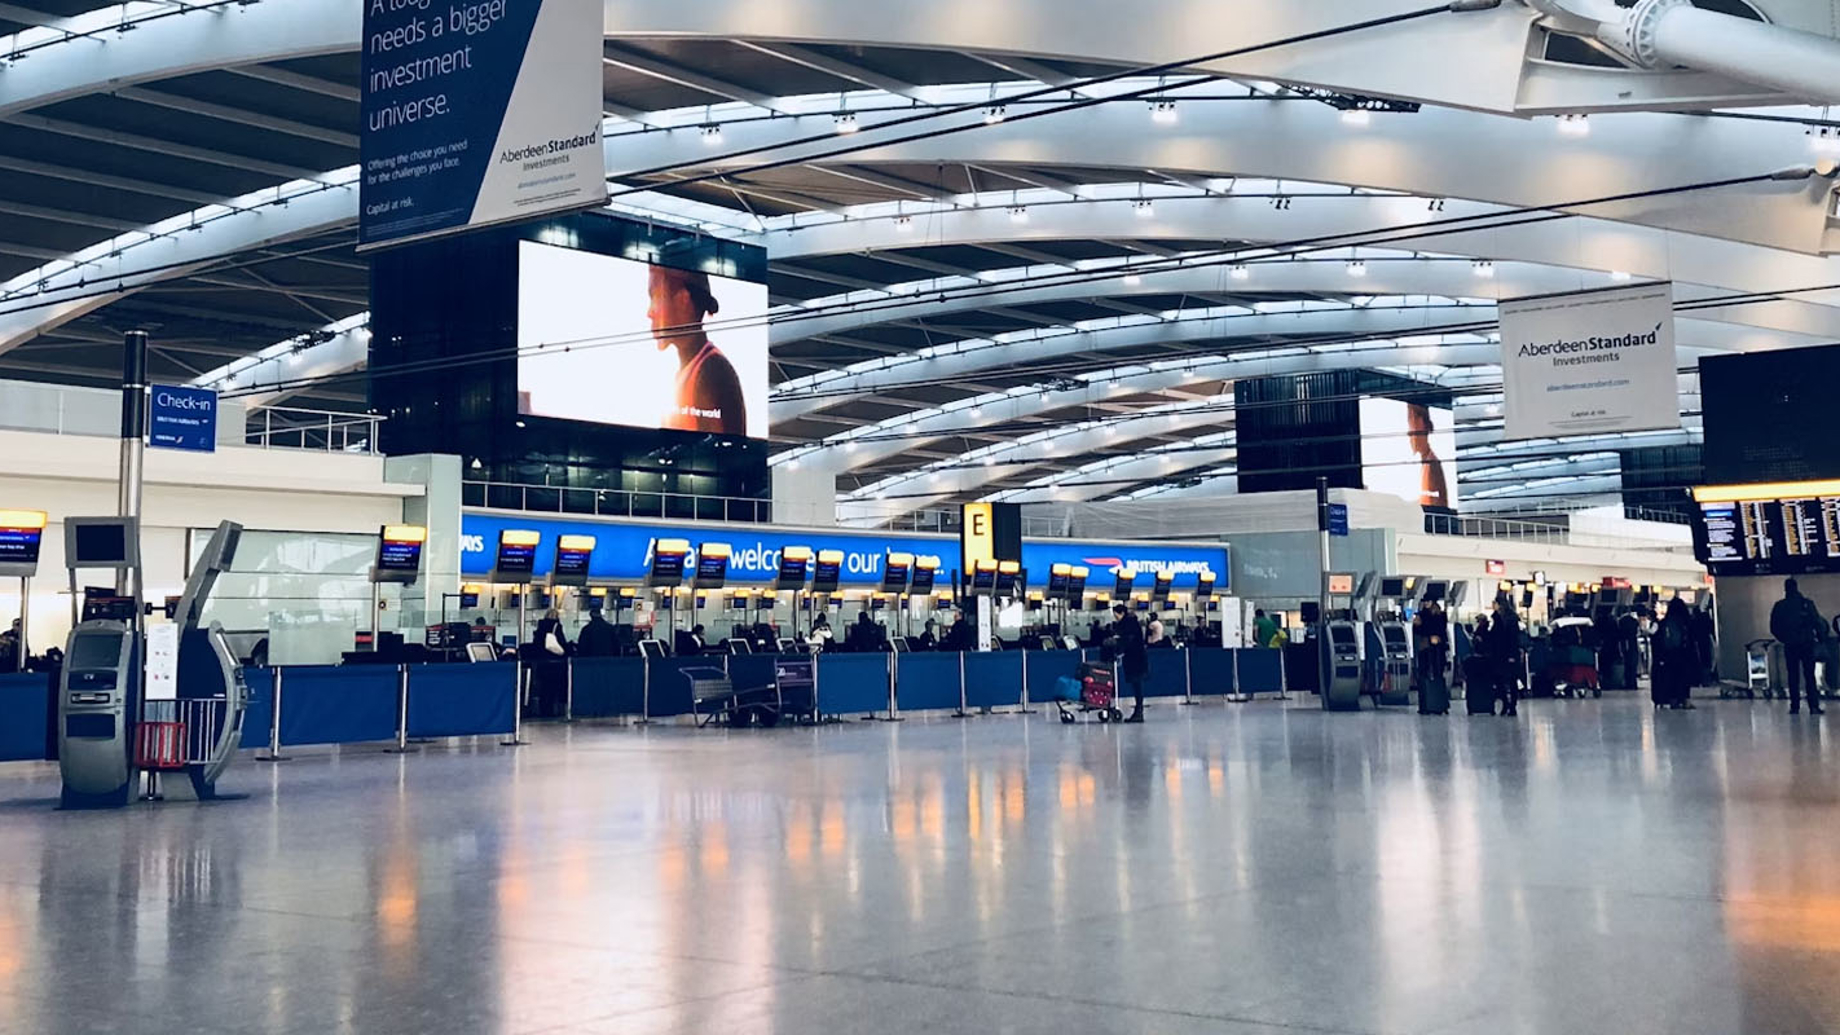 Check in desks at Heathrow Airport